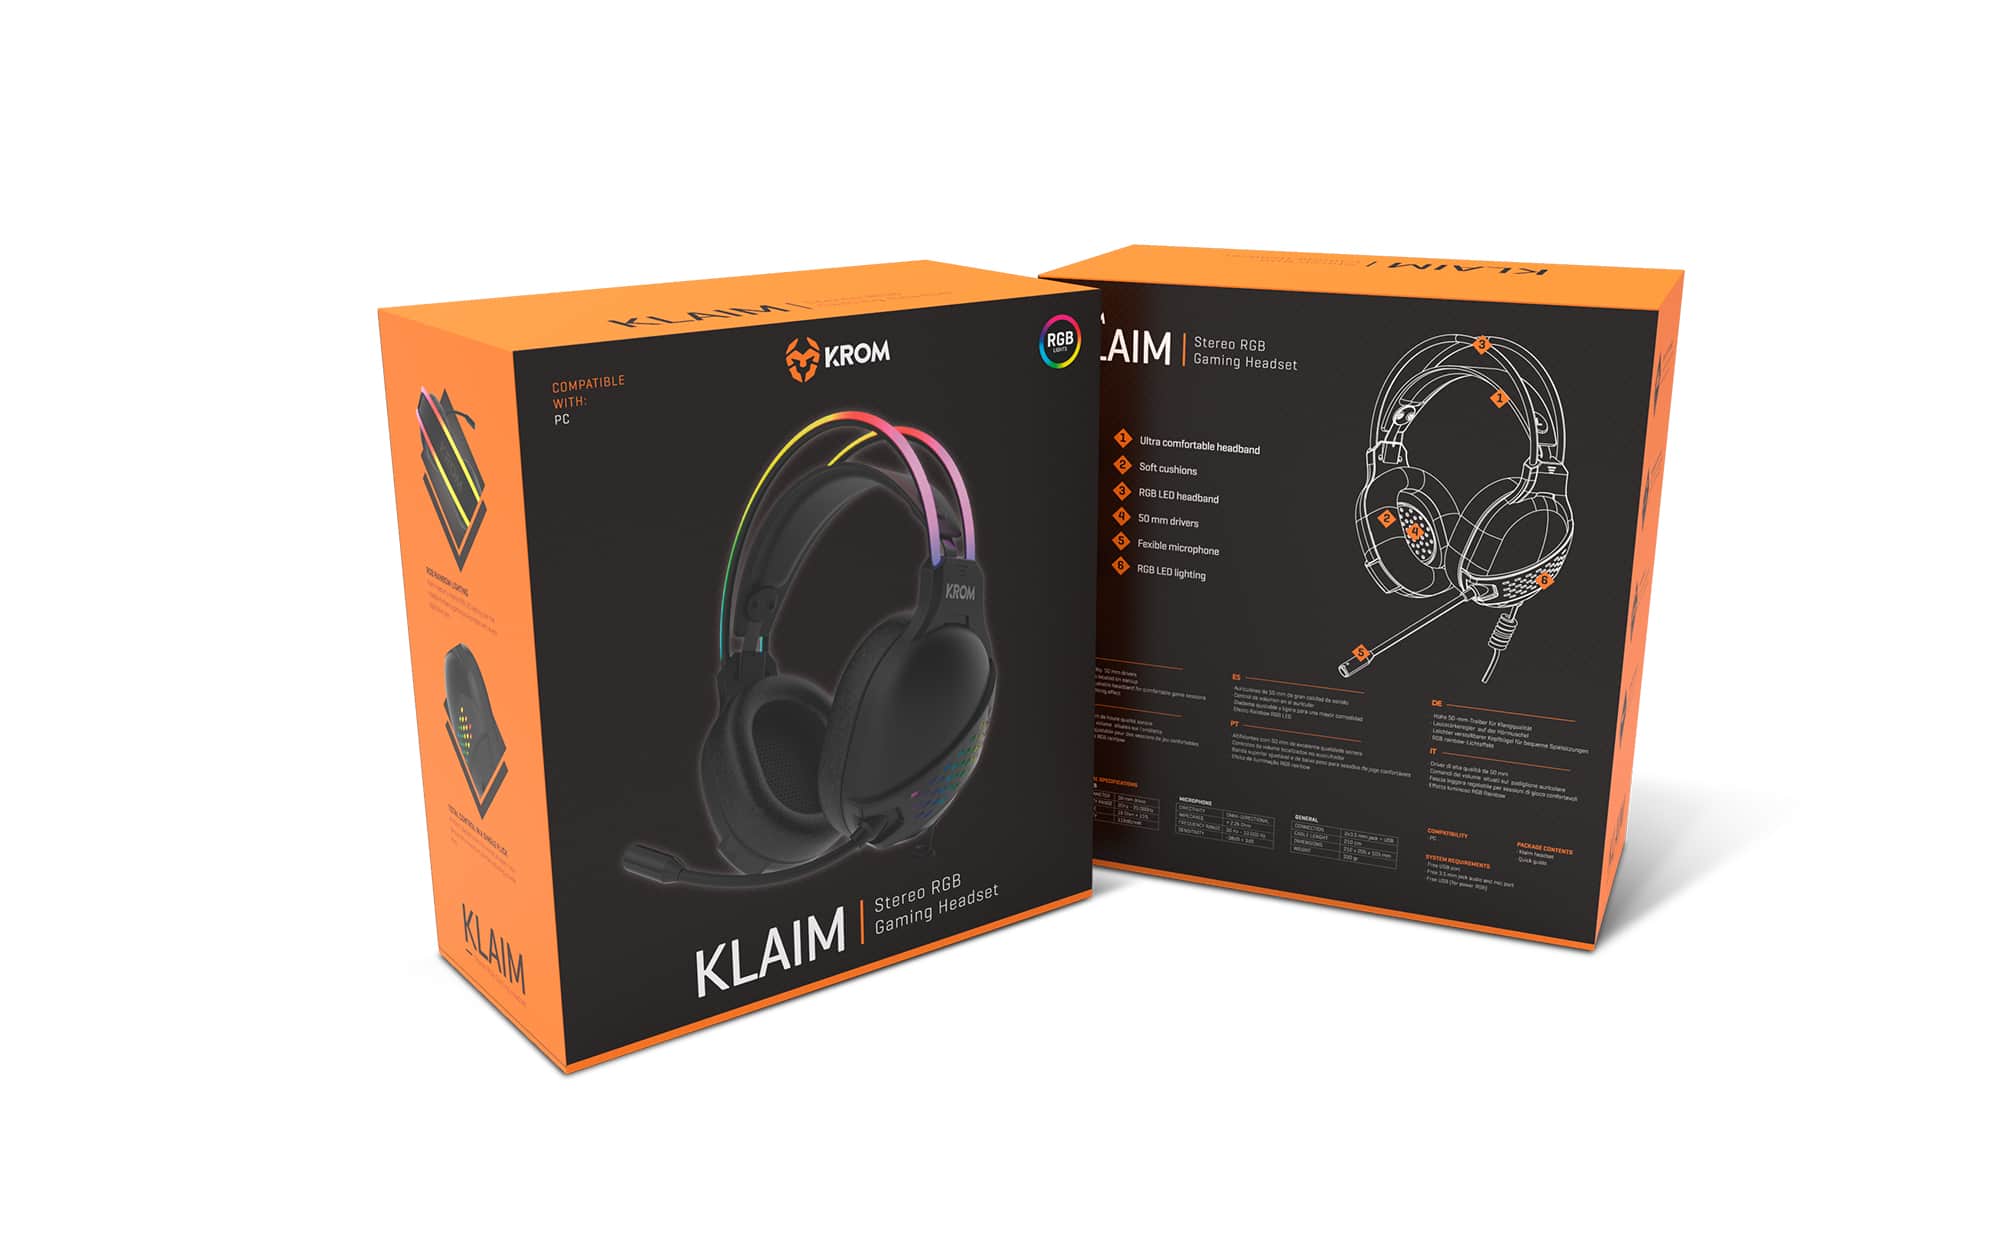 Freak out with the new Krom Klaim gaming headphones -